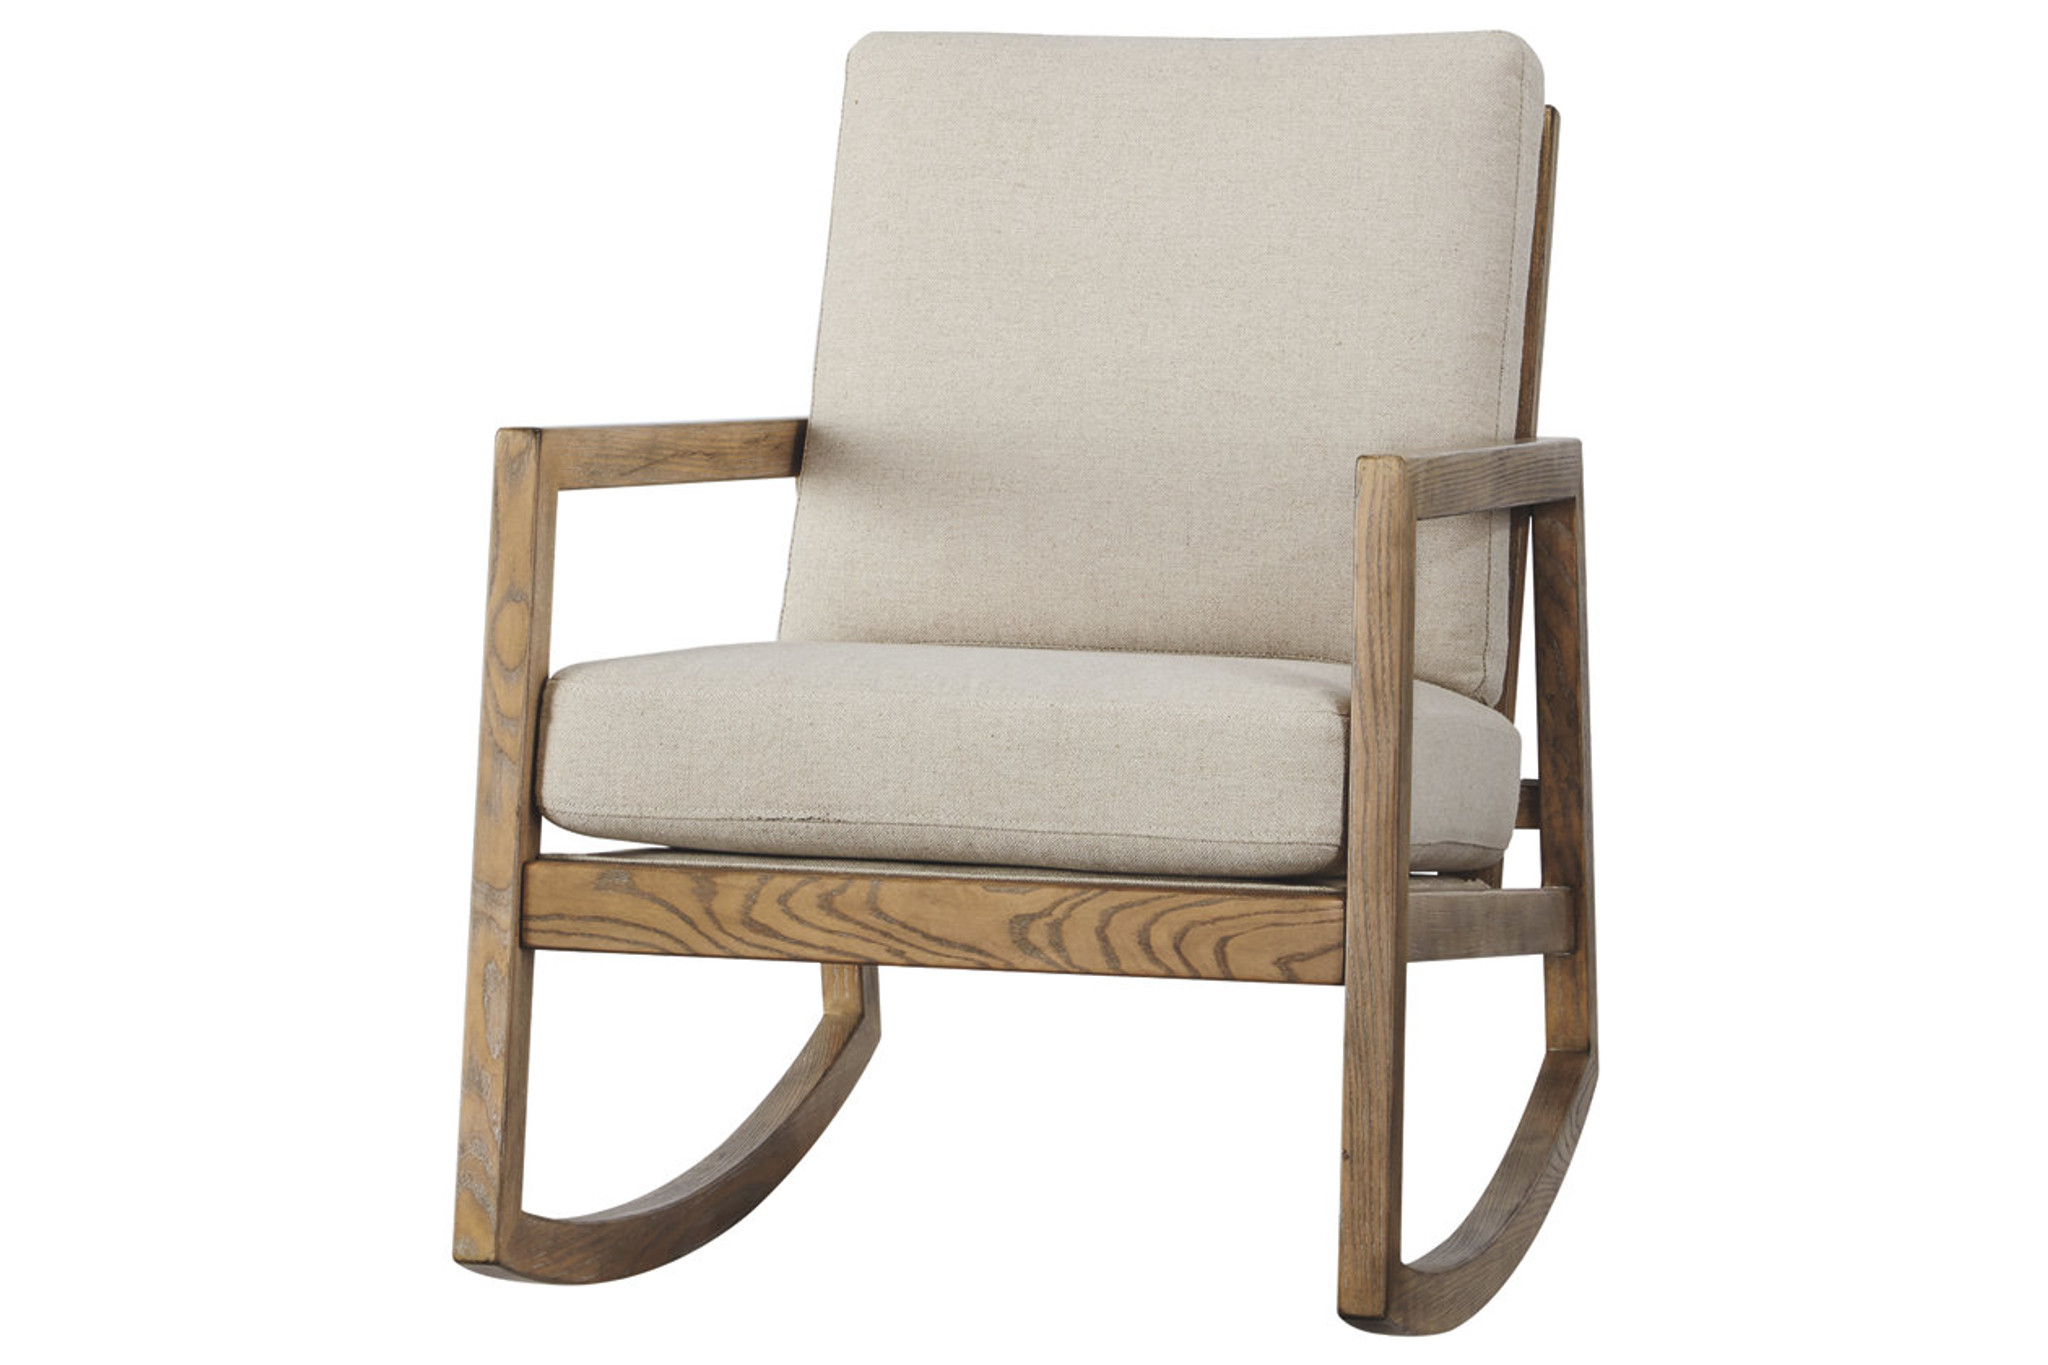 A3000081 NOVELDA ROCKER ACCENT CHAIR COLLECTION by Ashley